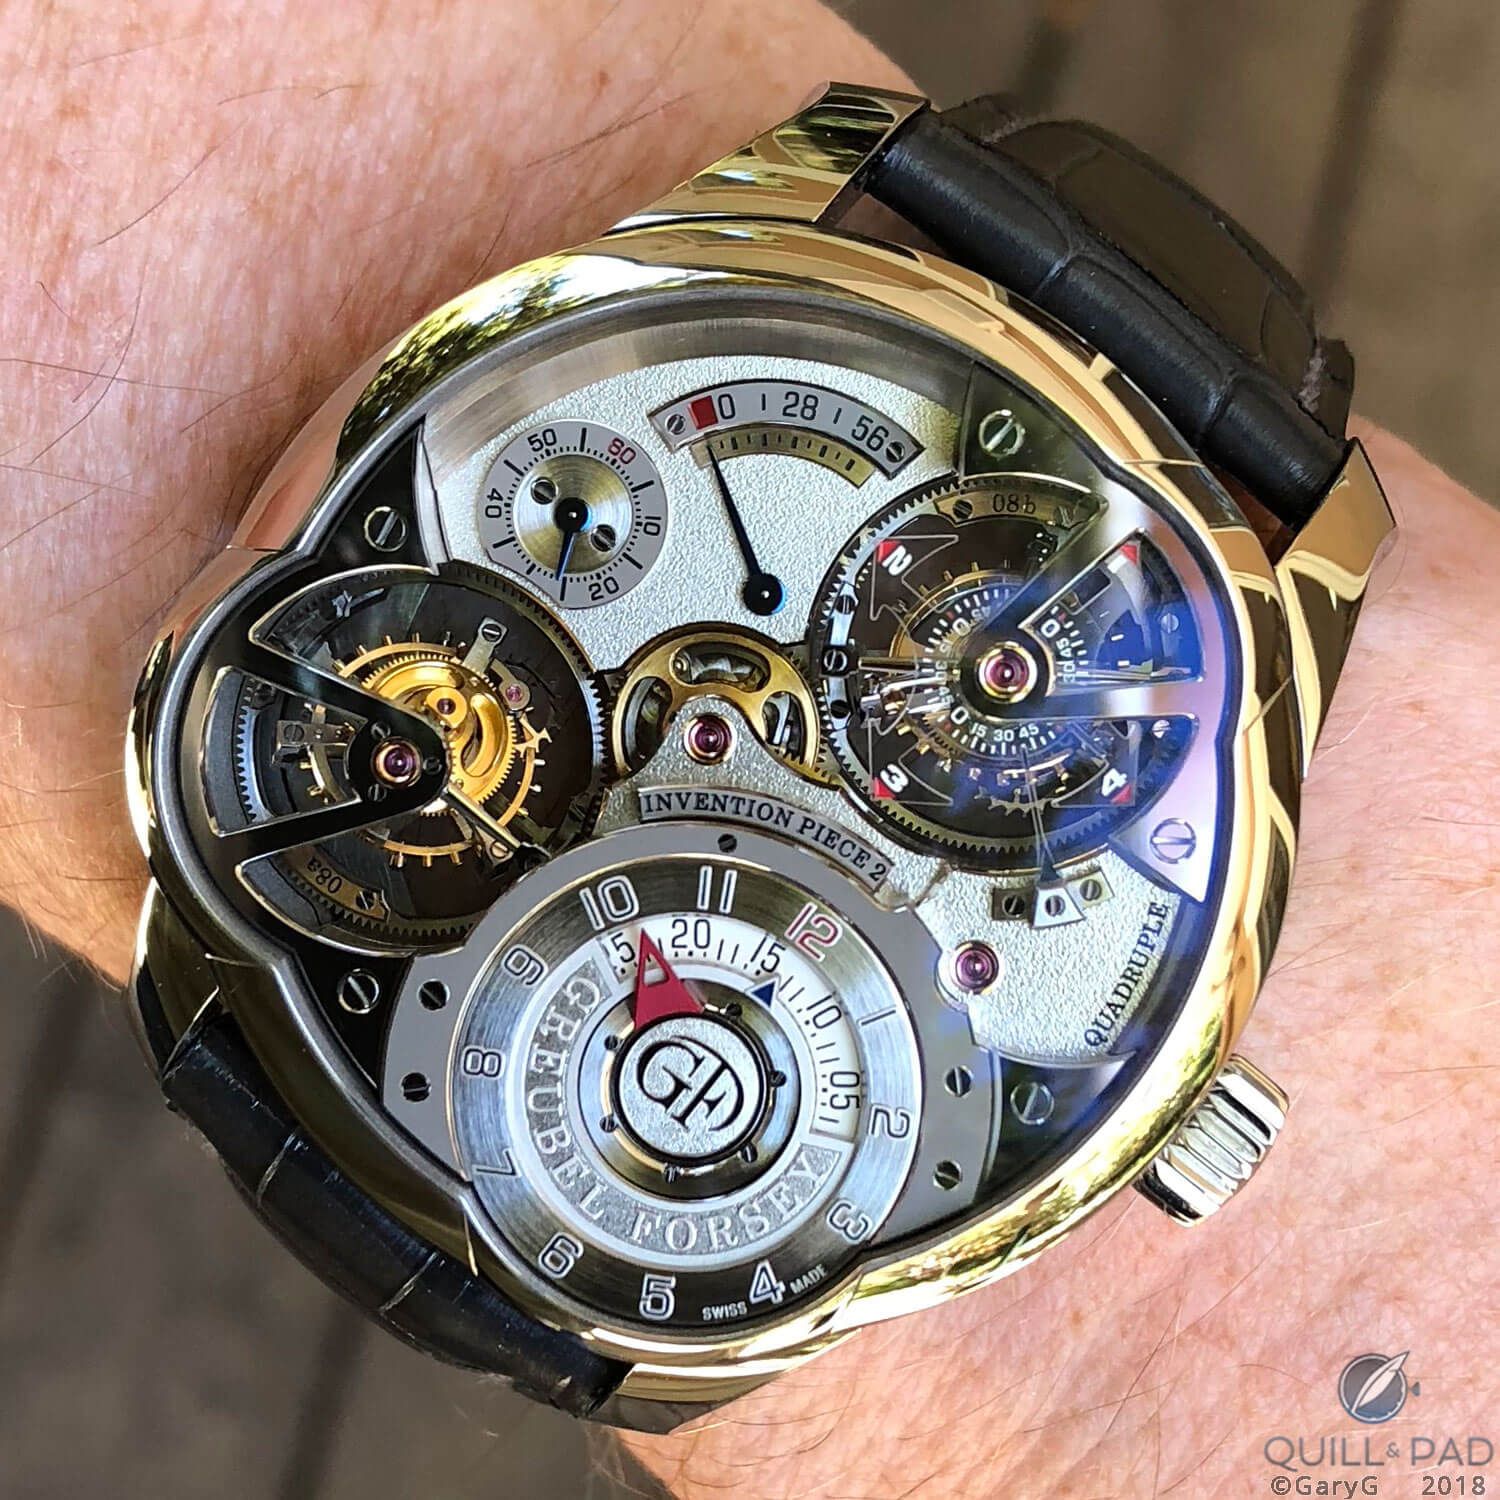 On the wrist: Greubel Forsey Invention Piece 2 in titanium